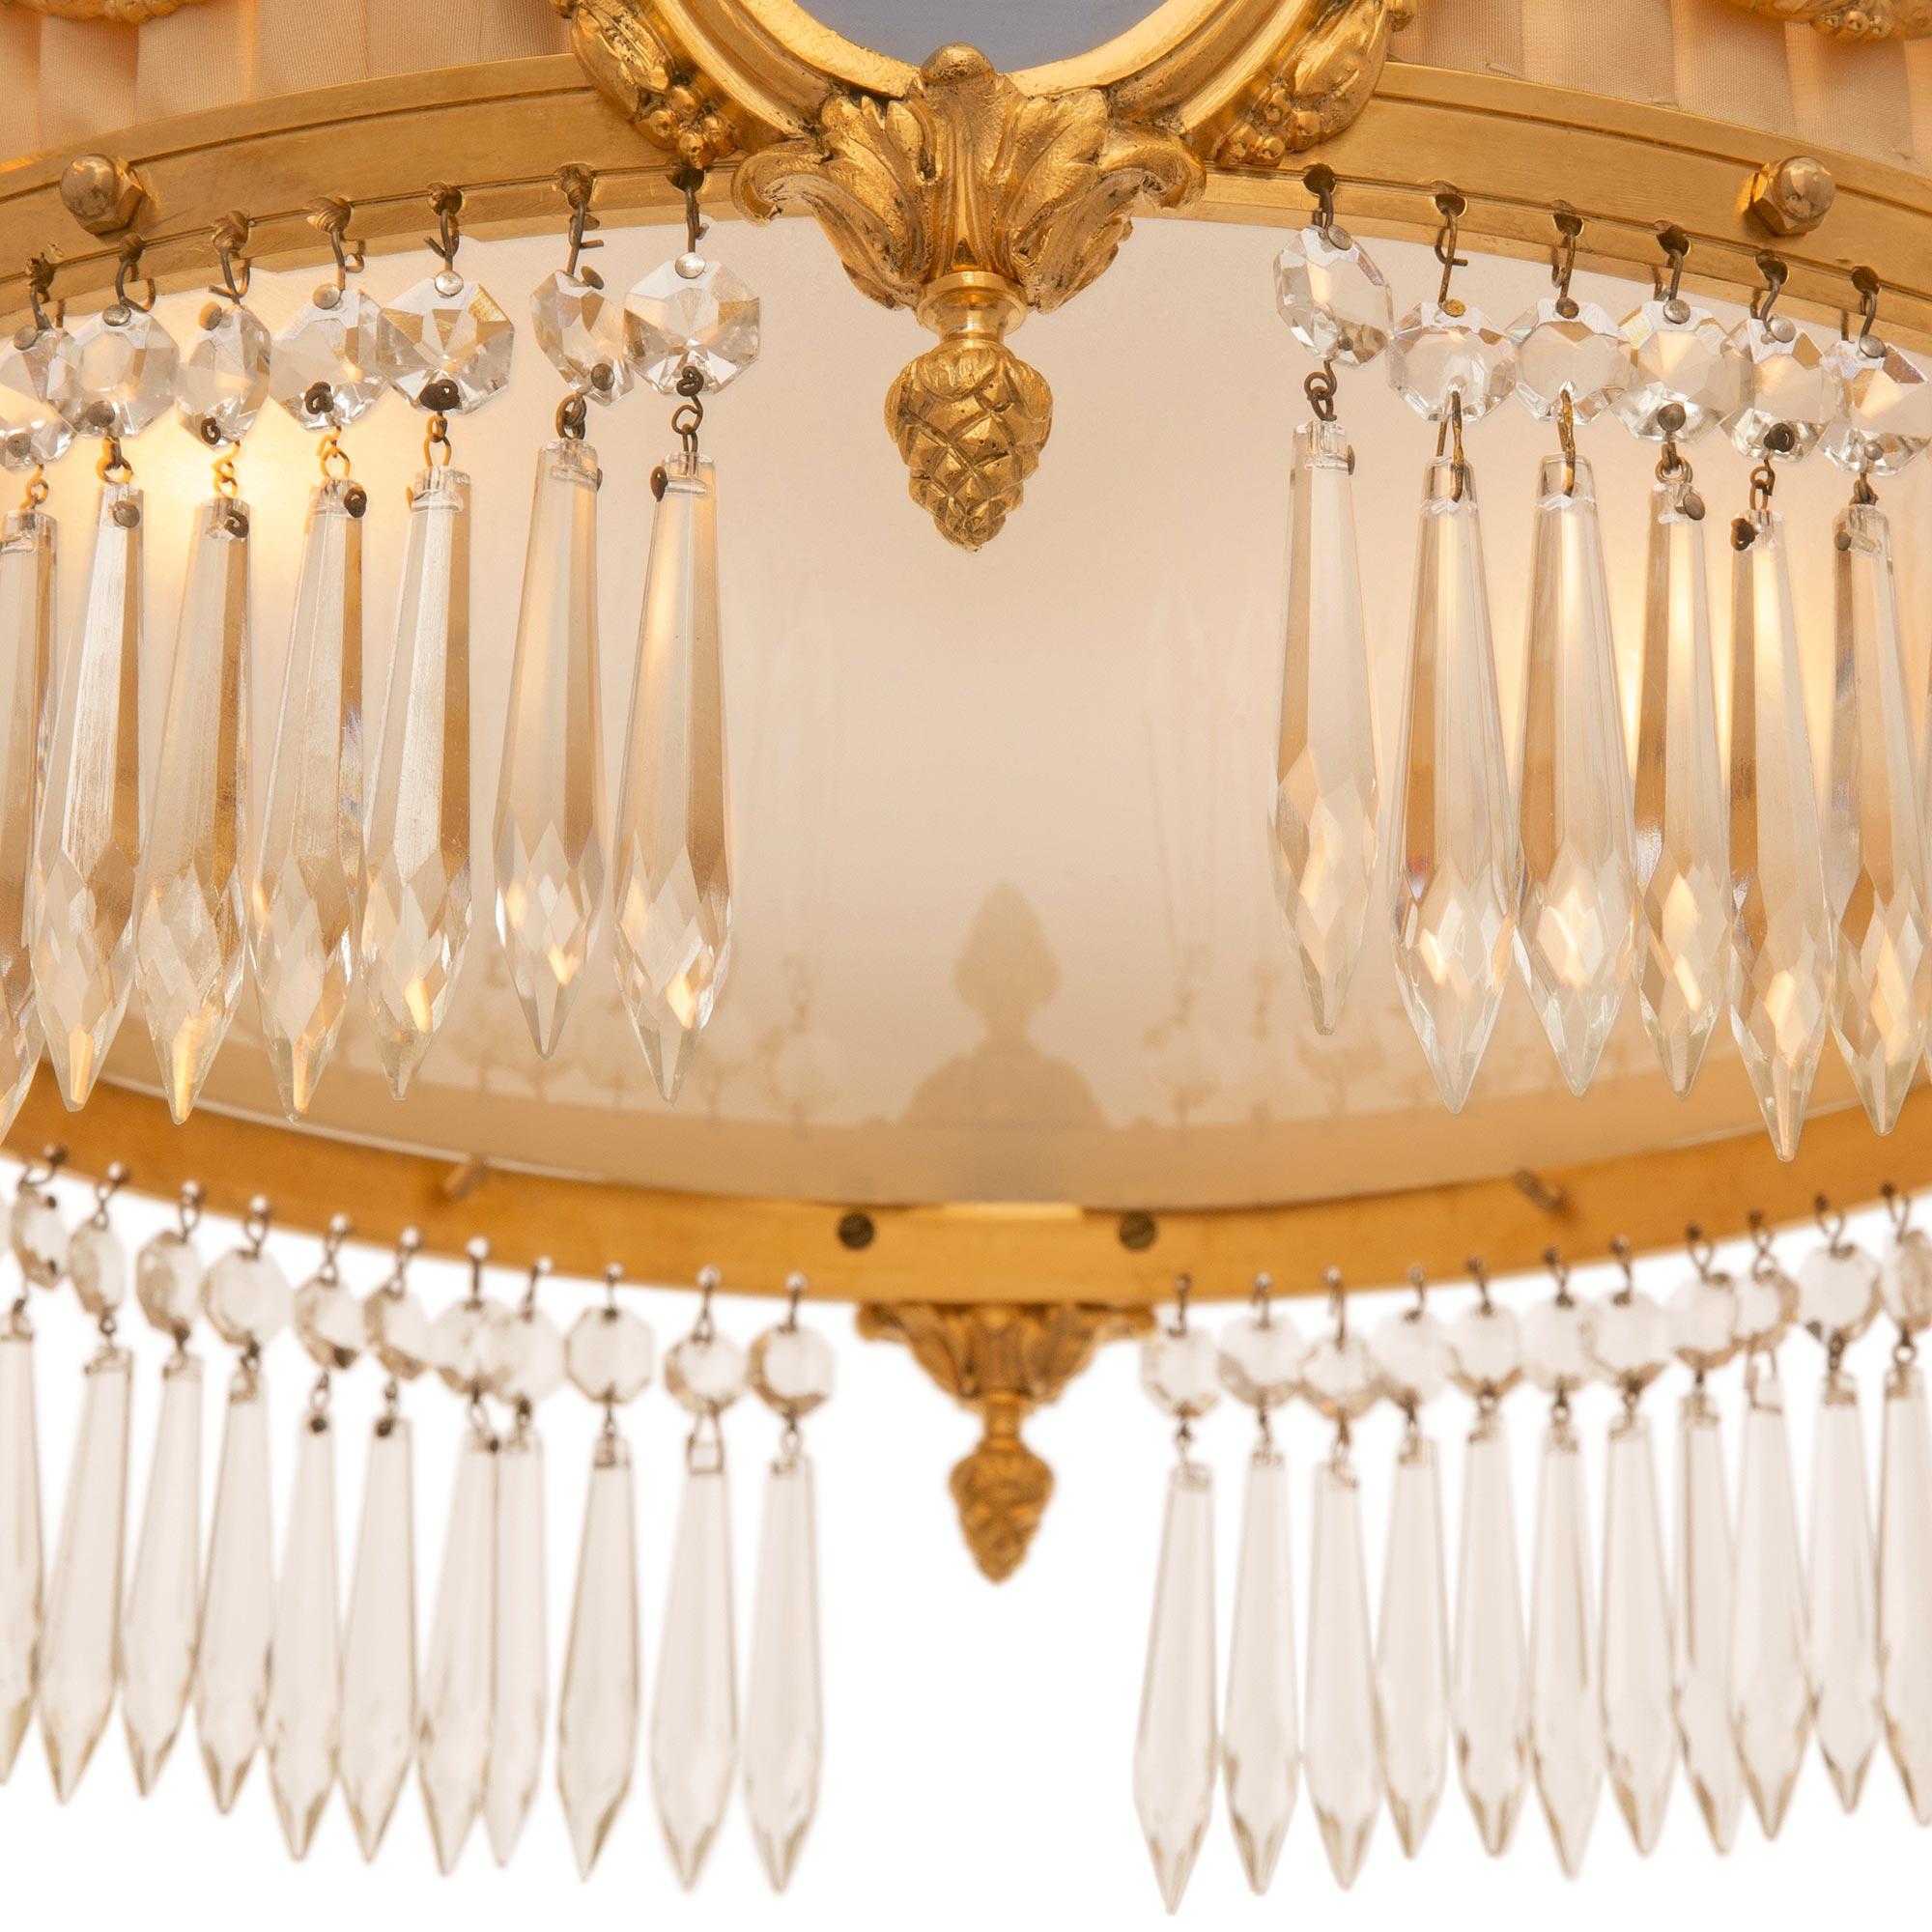 A French 19th century Louis XVI st. crystal chandelier For Sale 4